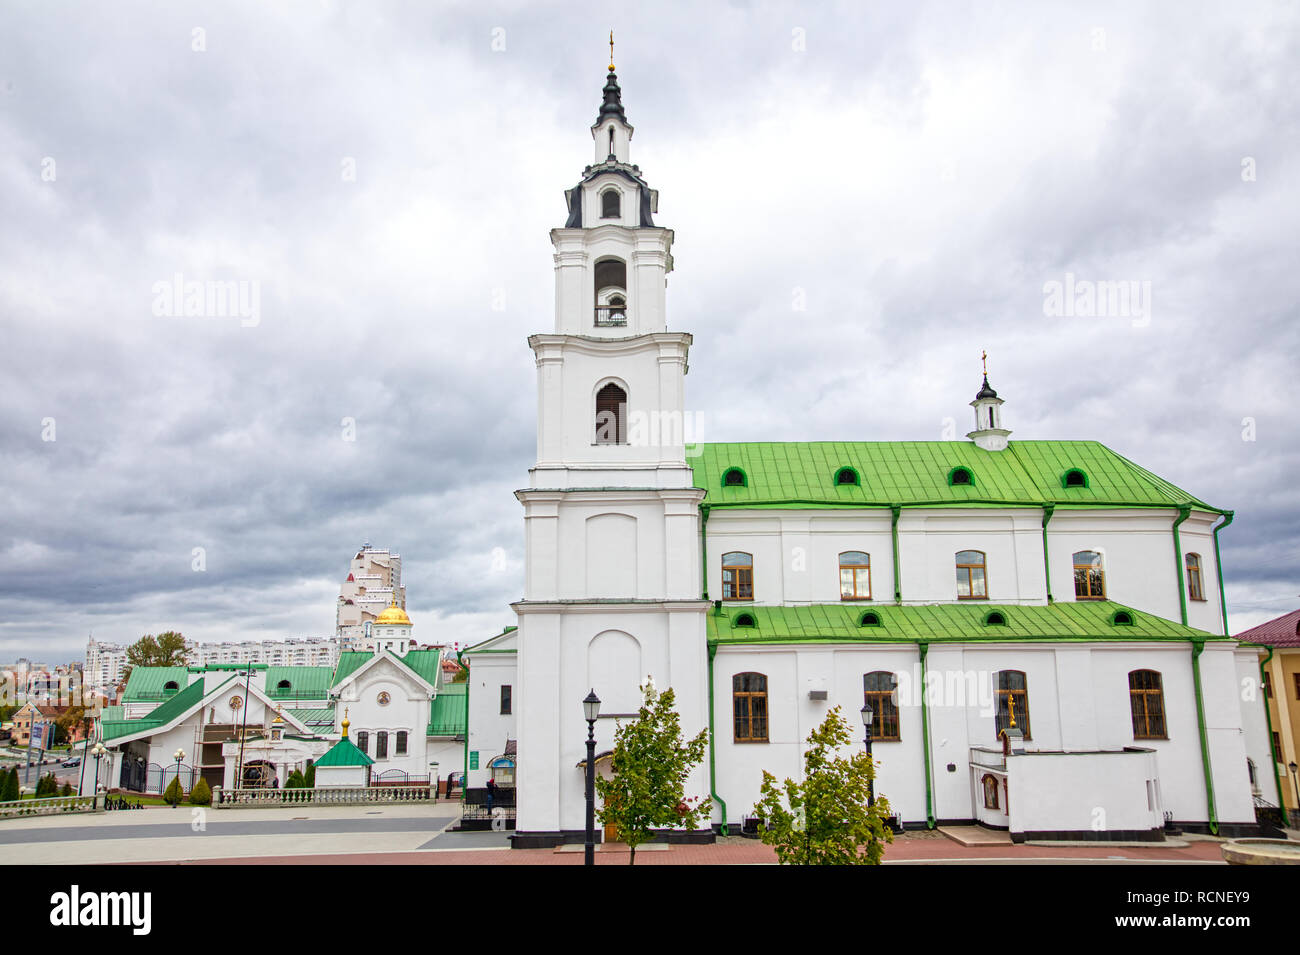 Minsk, Belarus - Οctober 4, 2018: Cathedral of holy spirit in Minsk - Church Of Belarus And Symbol Of Capital. Famous Landmark Stock Photo